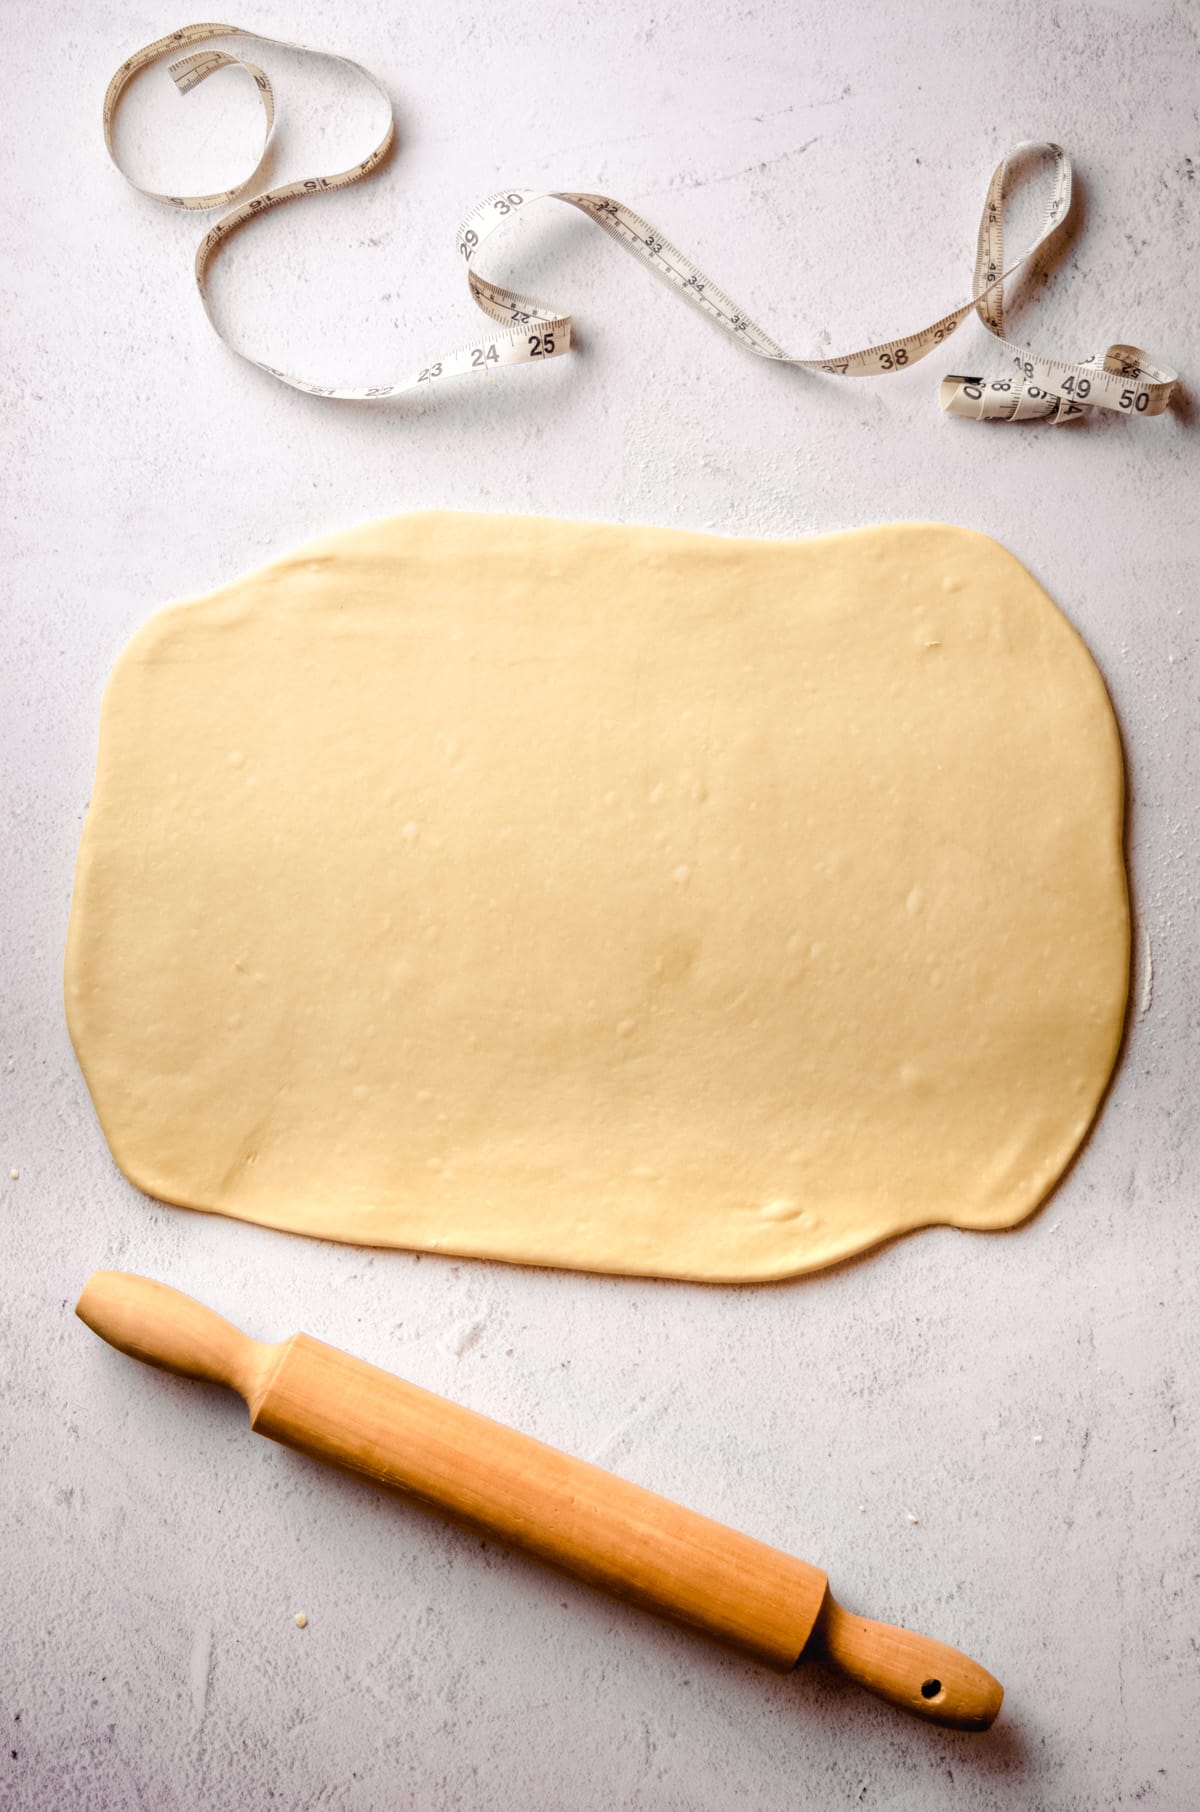 Cinnamon roll dough rolled out into a rectangle with a measuring tape and rolling pin.